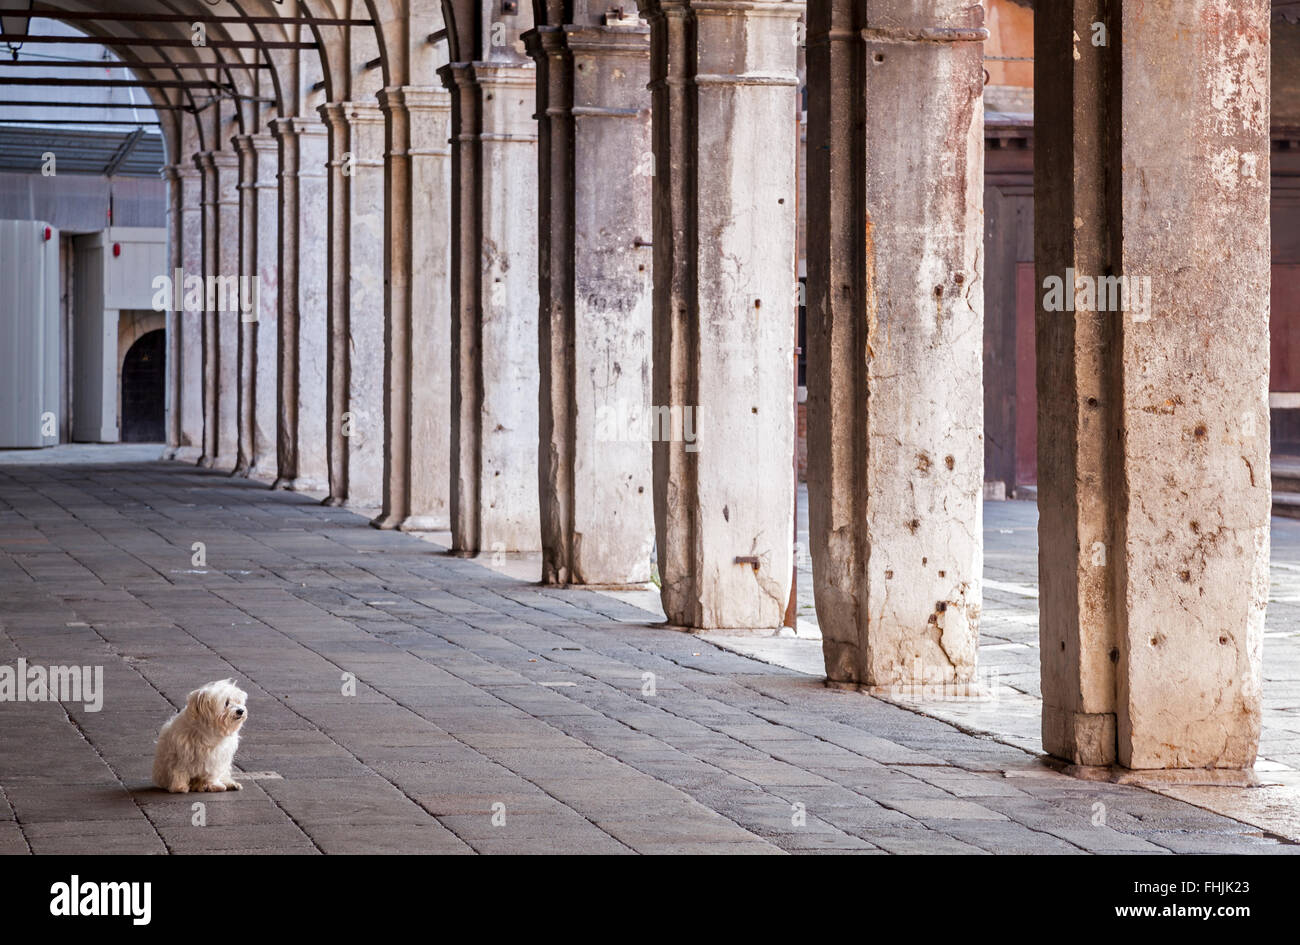 Crumbling columns of the colonnade on Campo di San Giacomo di Rialto, Venice, Italy with a seemingly abandoned small white dog Stock Photo